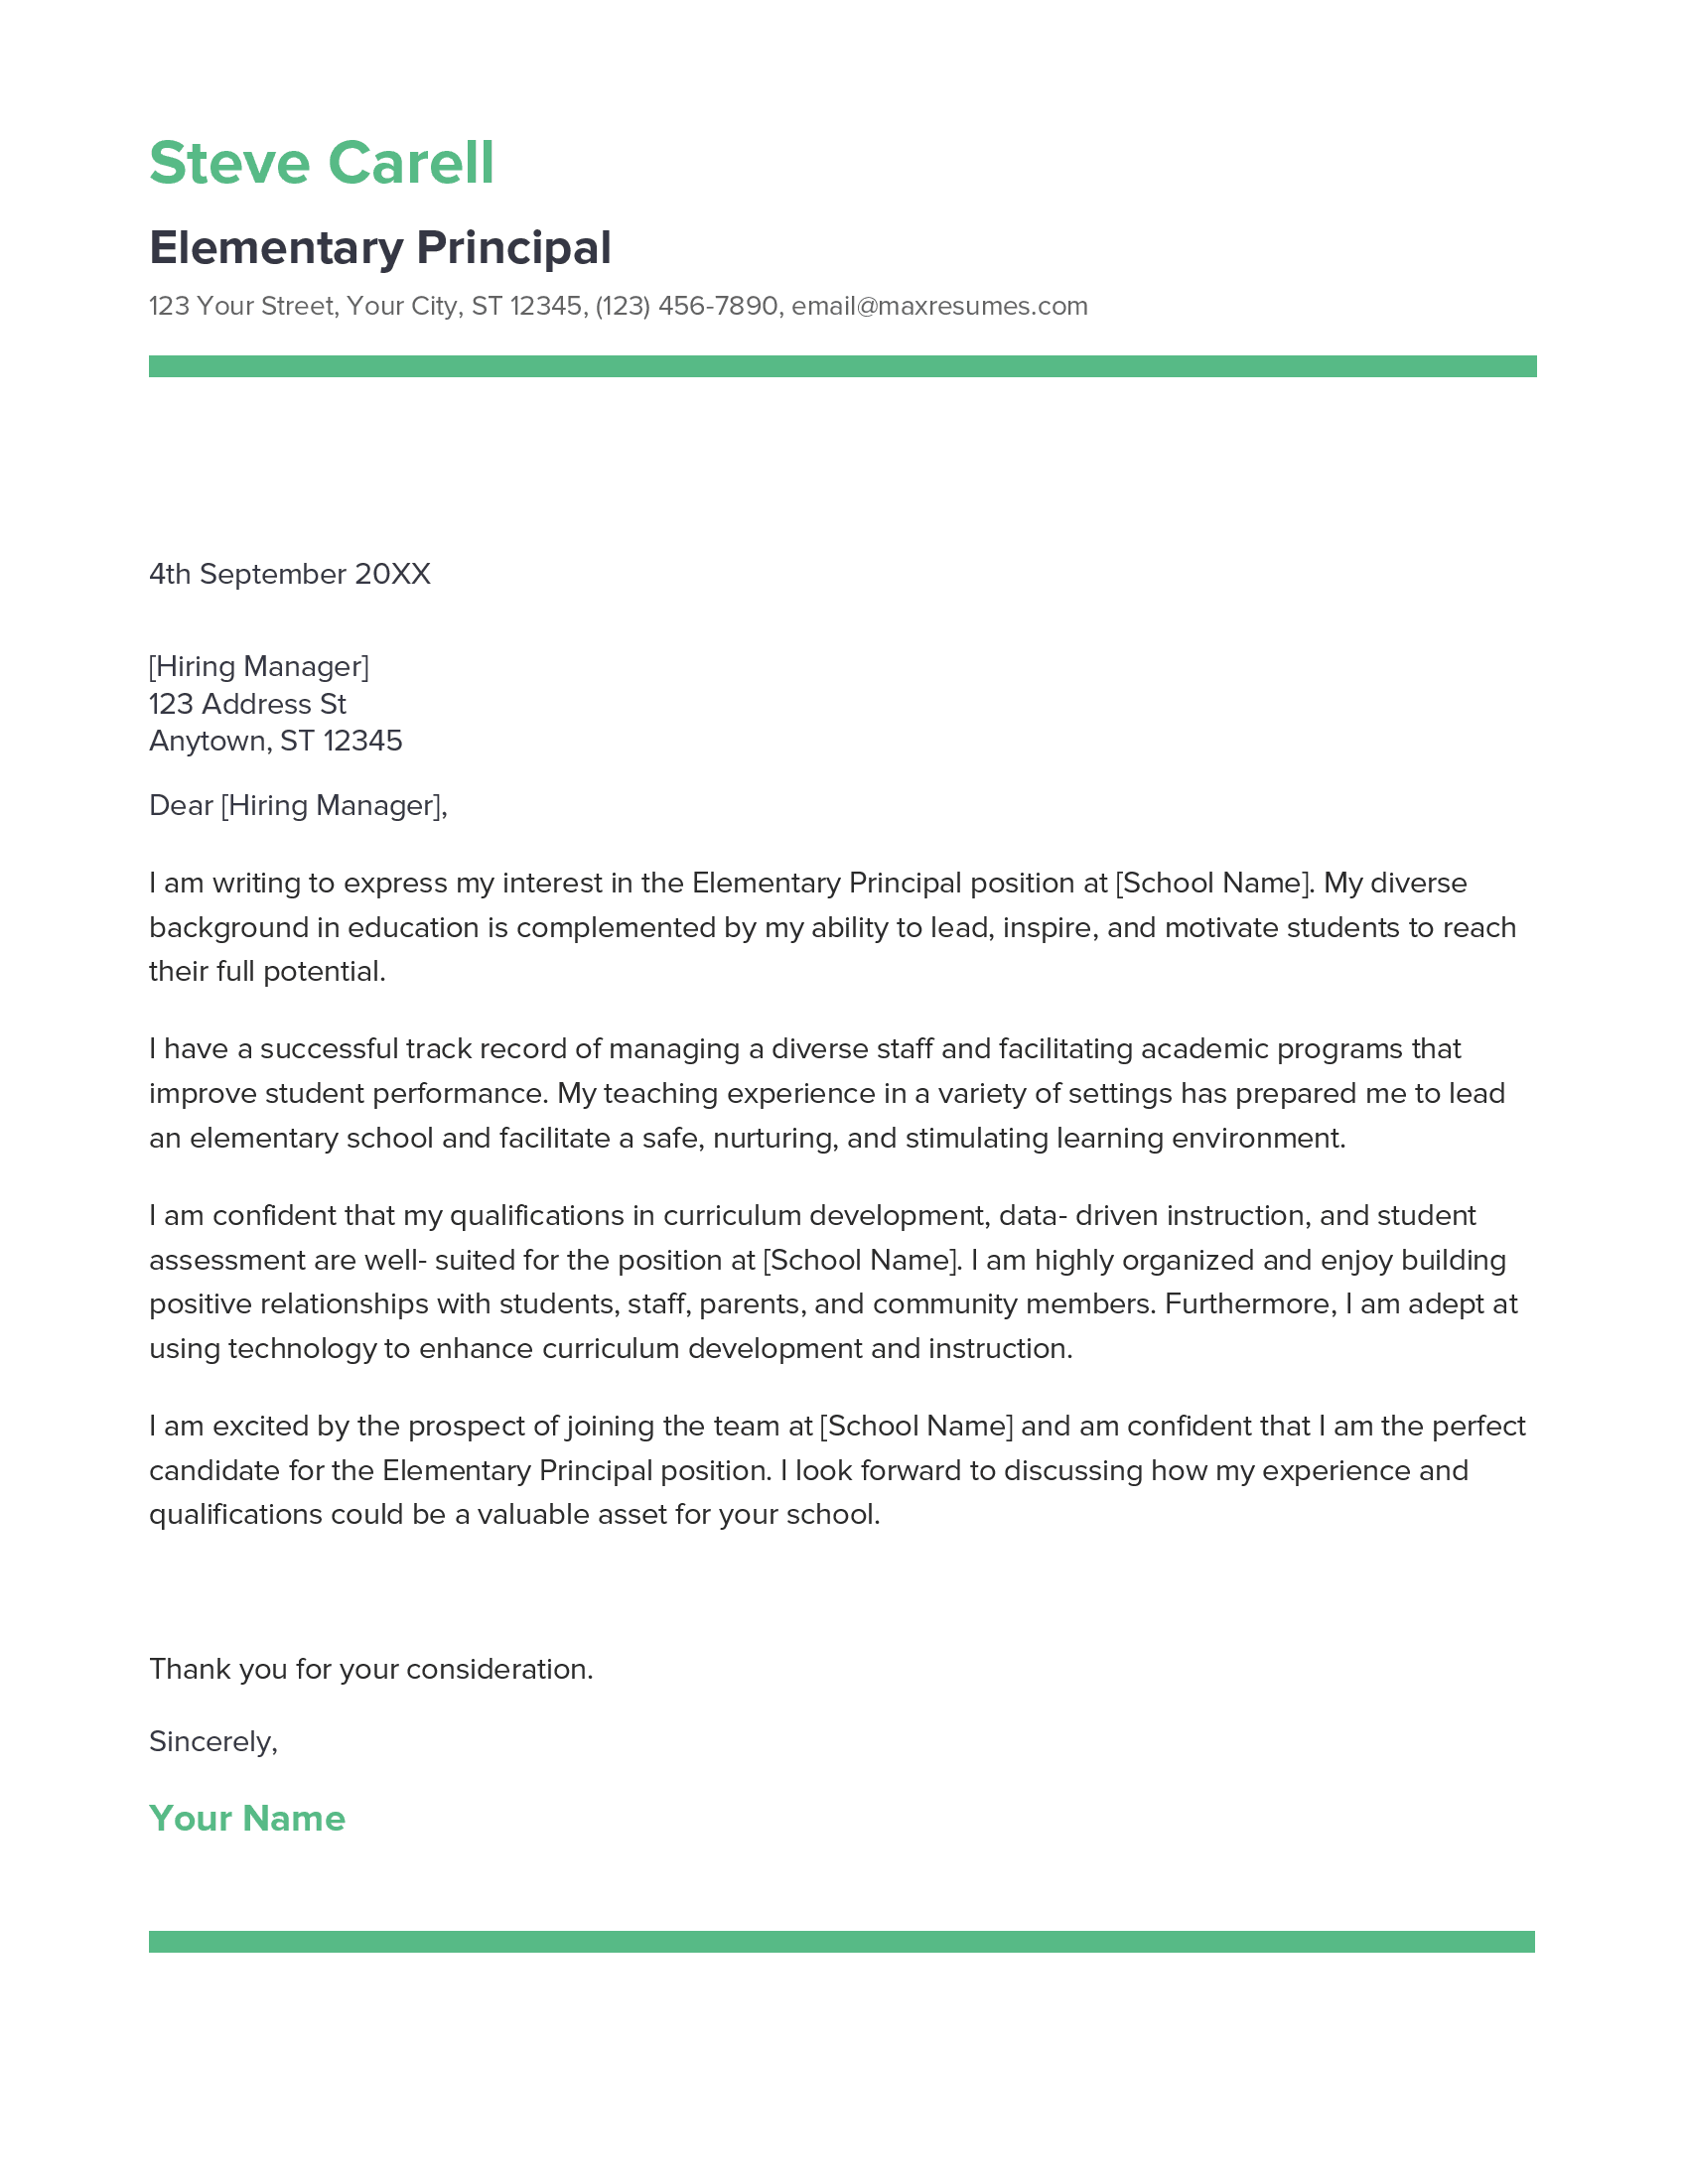 Elementary Principal Cover Letter Example